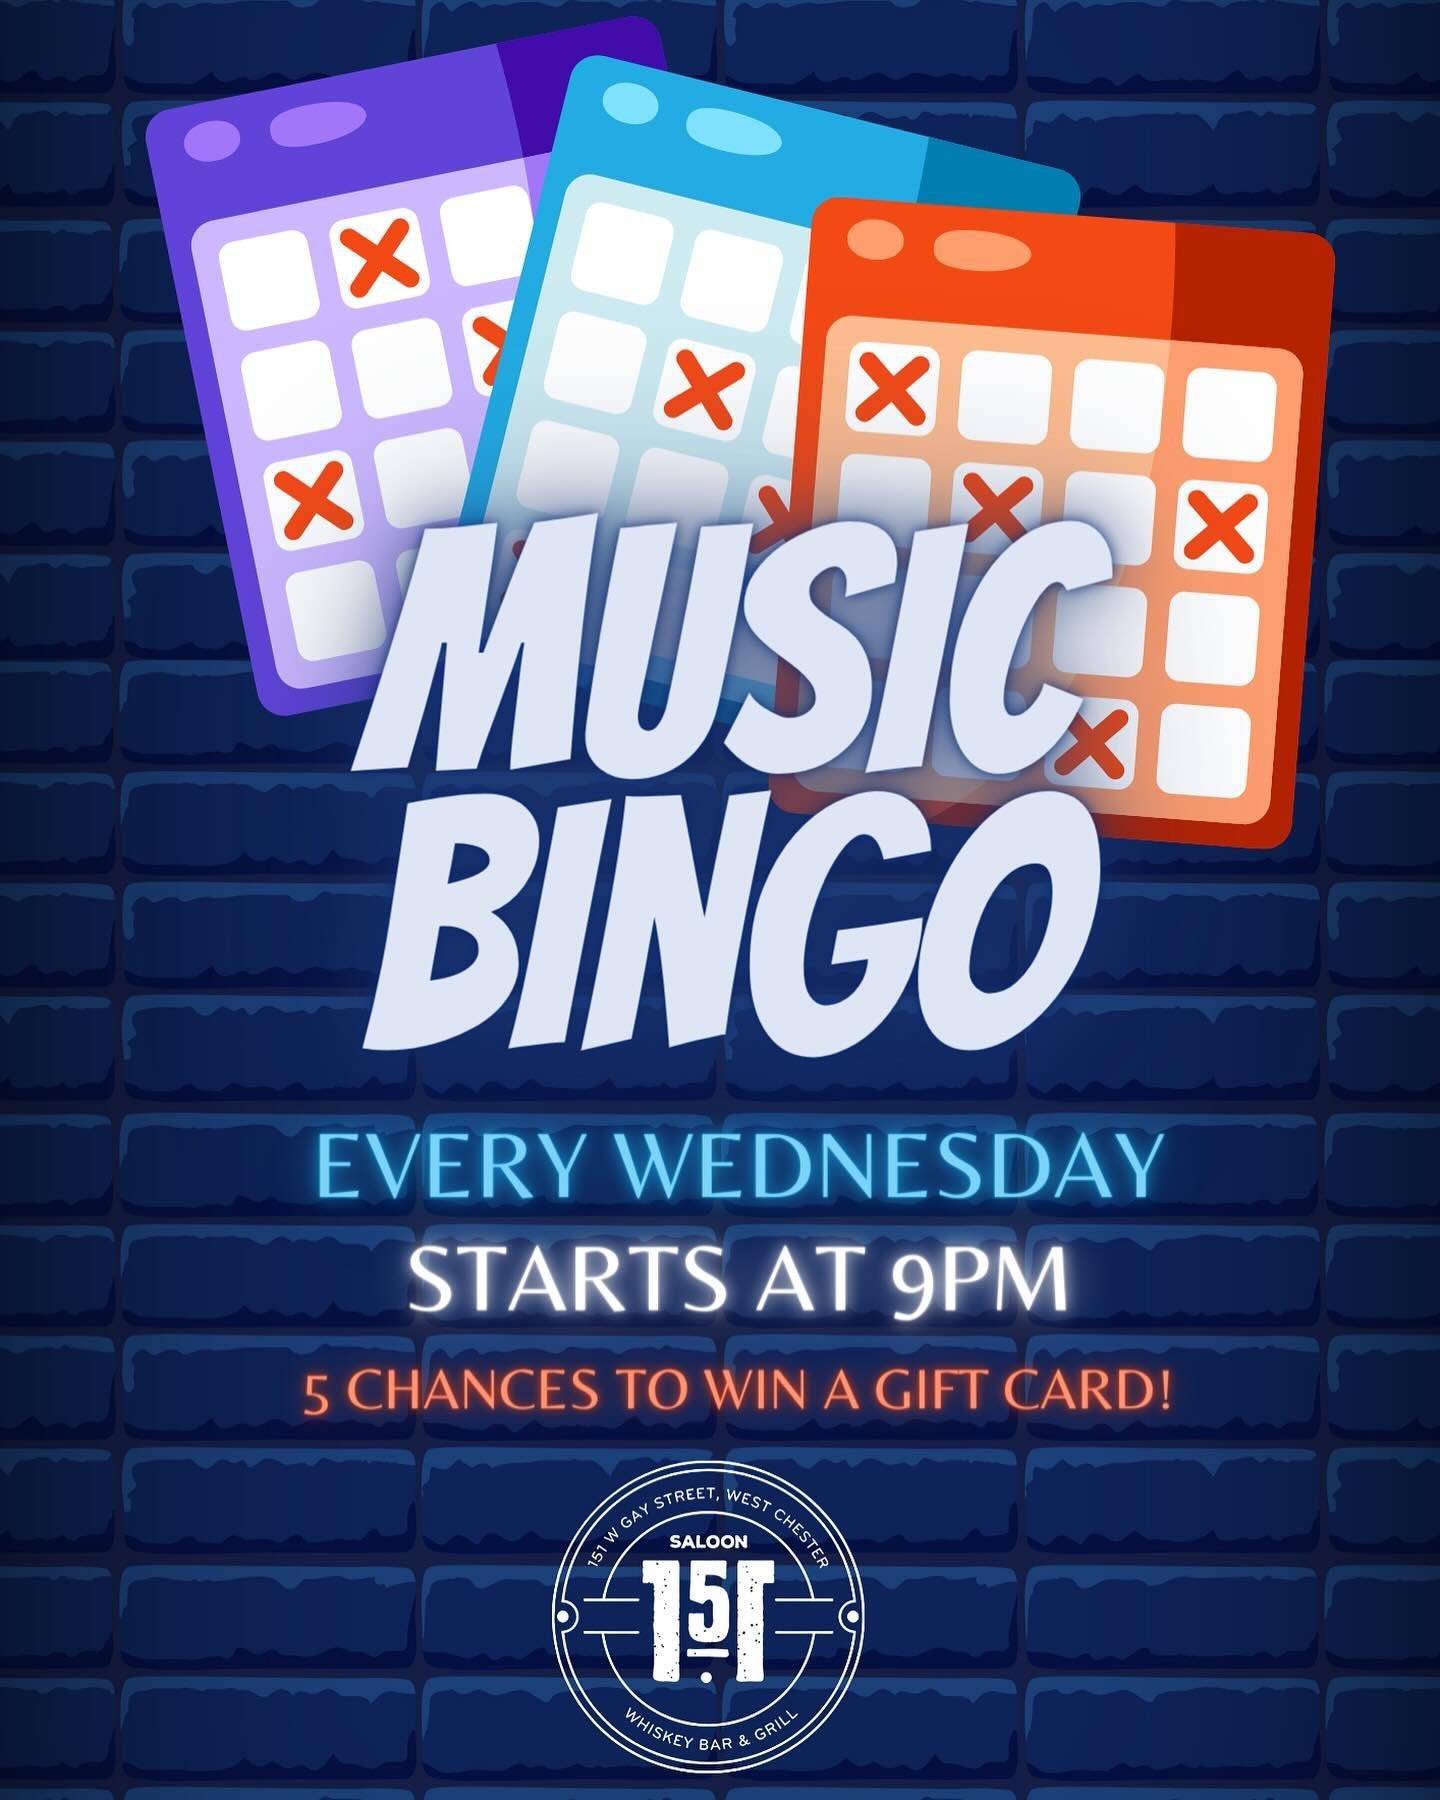 Weekly Music Bingo starts up at 9pm 🎵 5 chances to win a gift card! 🌮 1/2 price tacos, taco salads &amp; quesadillas ALL DAY! #westchesterpa #downtownwestchesterpa #wcupa #wcuofpa #westchesterborough #westchesteruniversity #saloon151 #westchester #